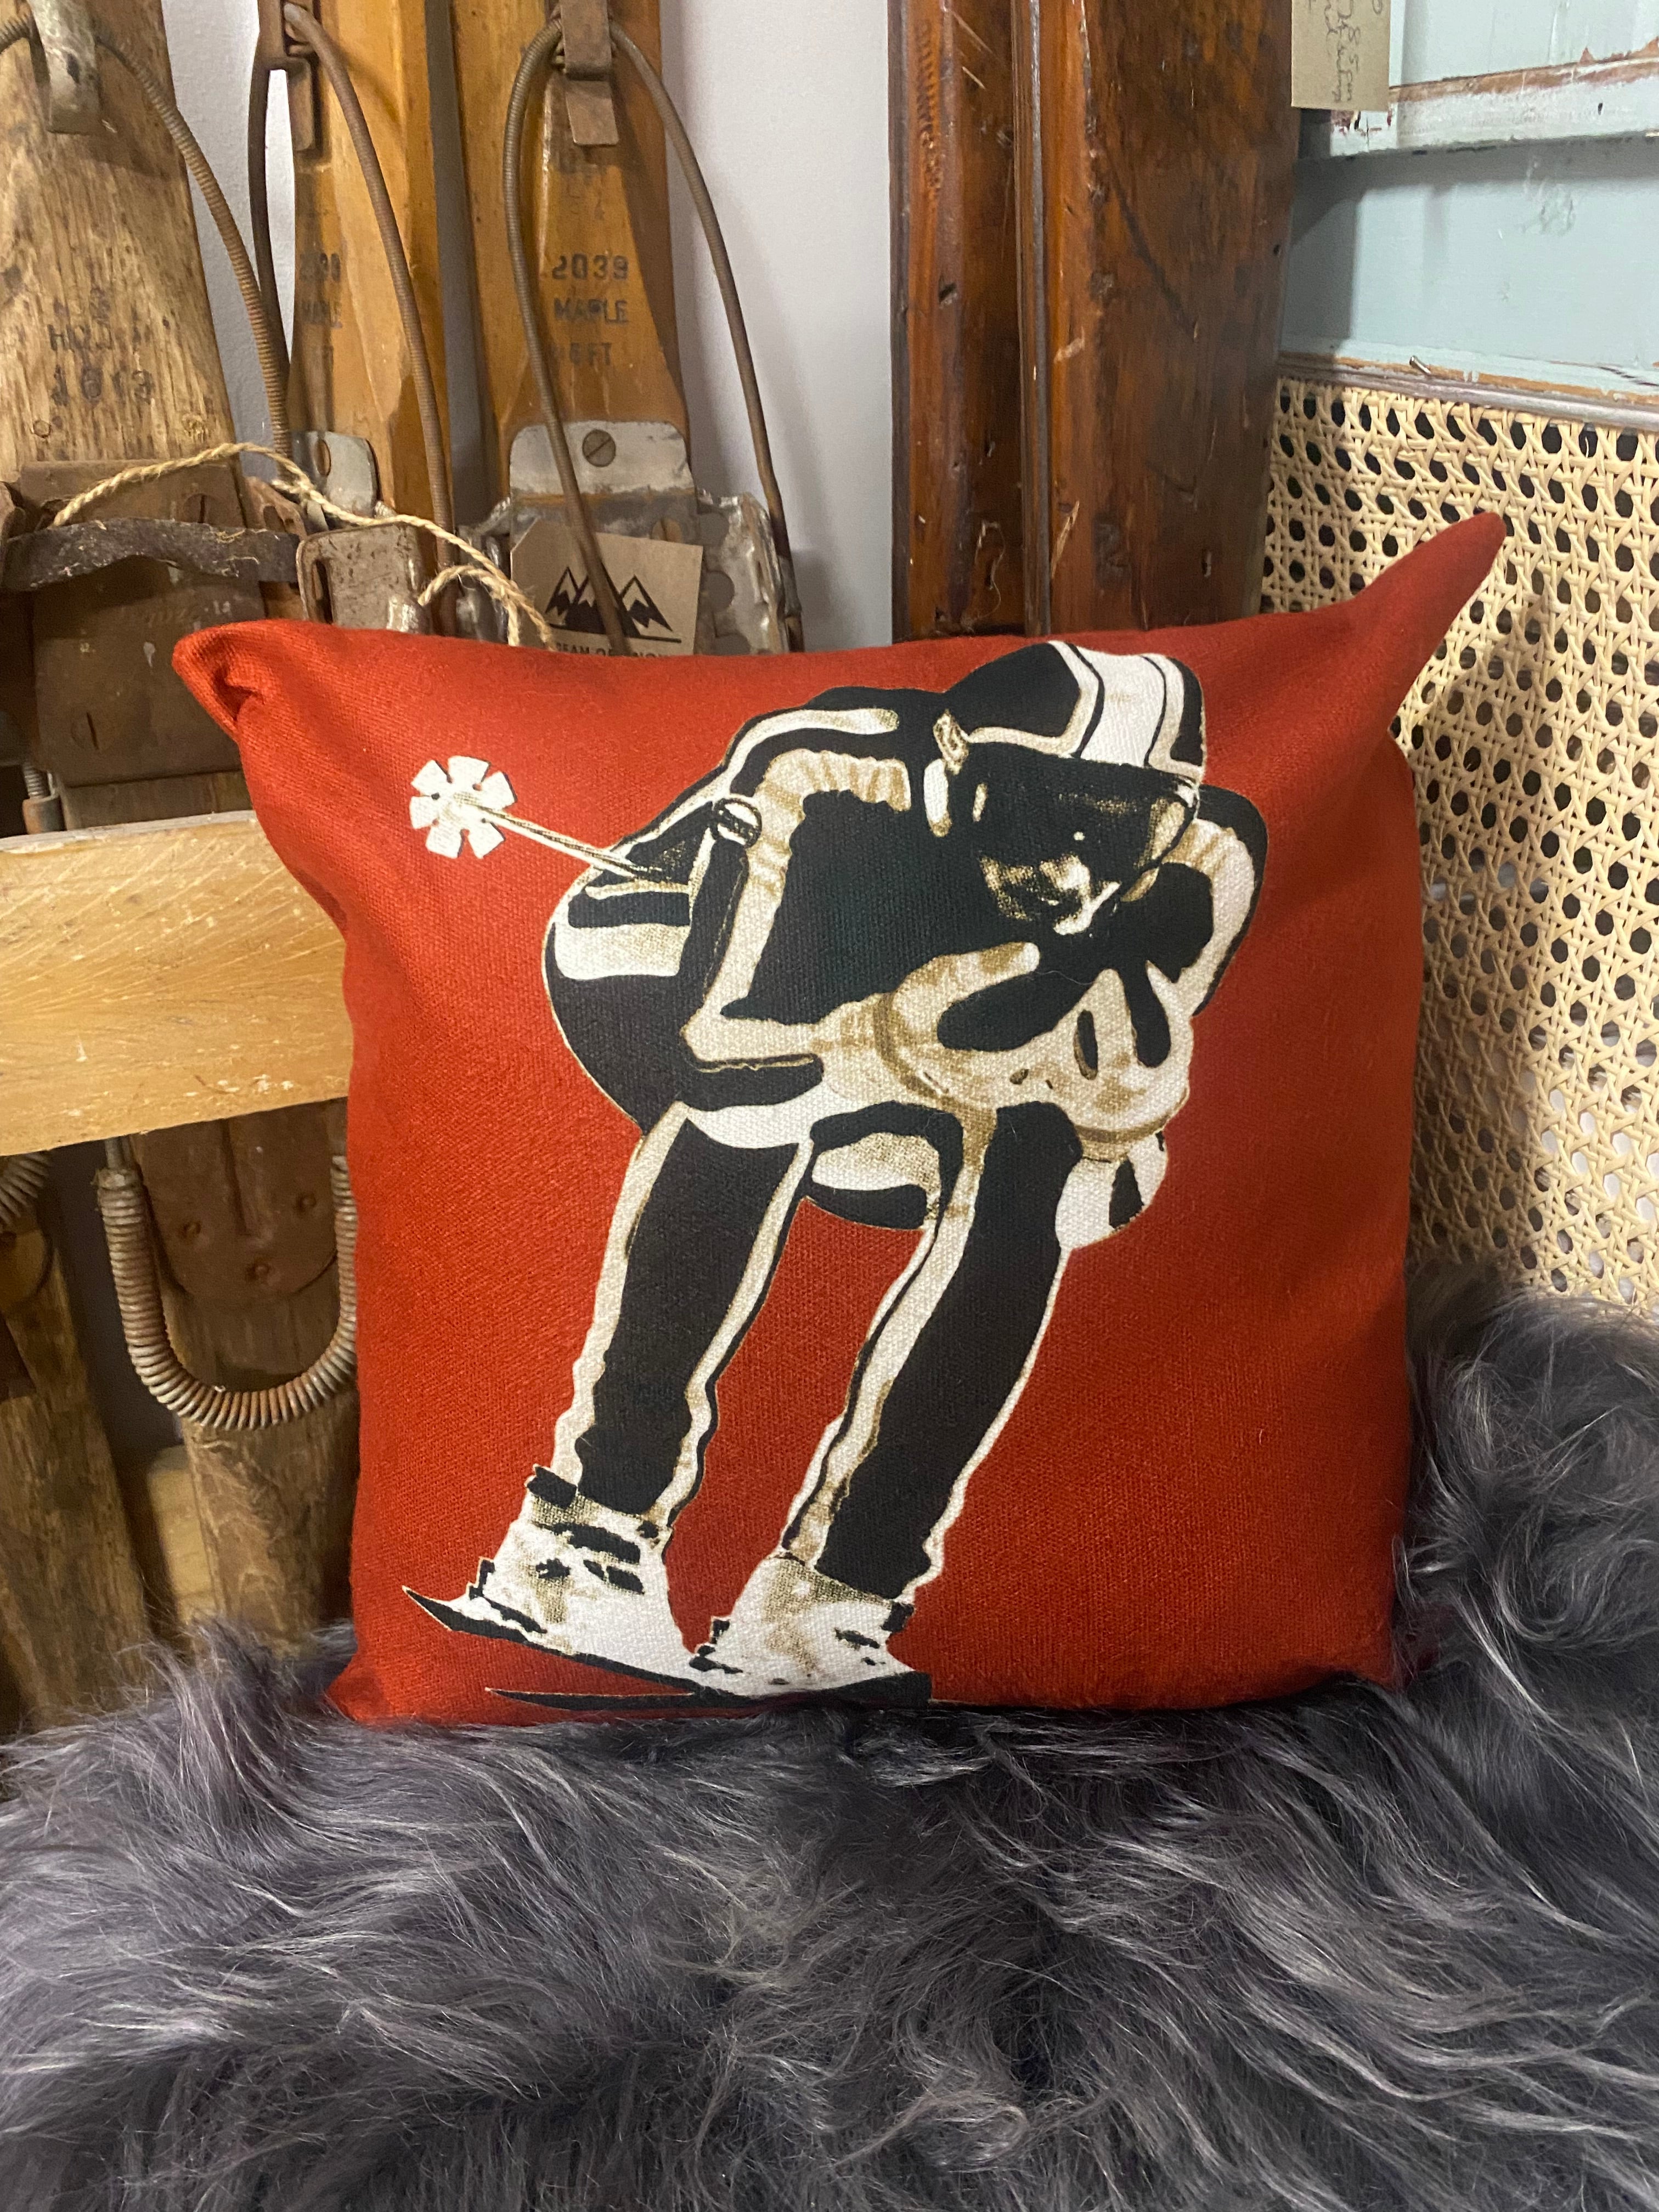 vintage ski racer graphic on red coloured cushion, on a white sheepskin against vintage wooden skis and a blue dresser